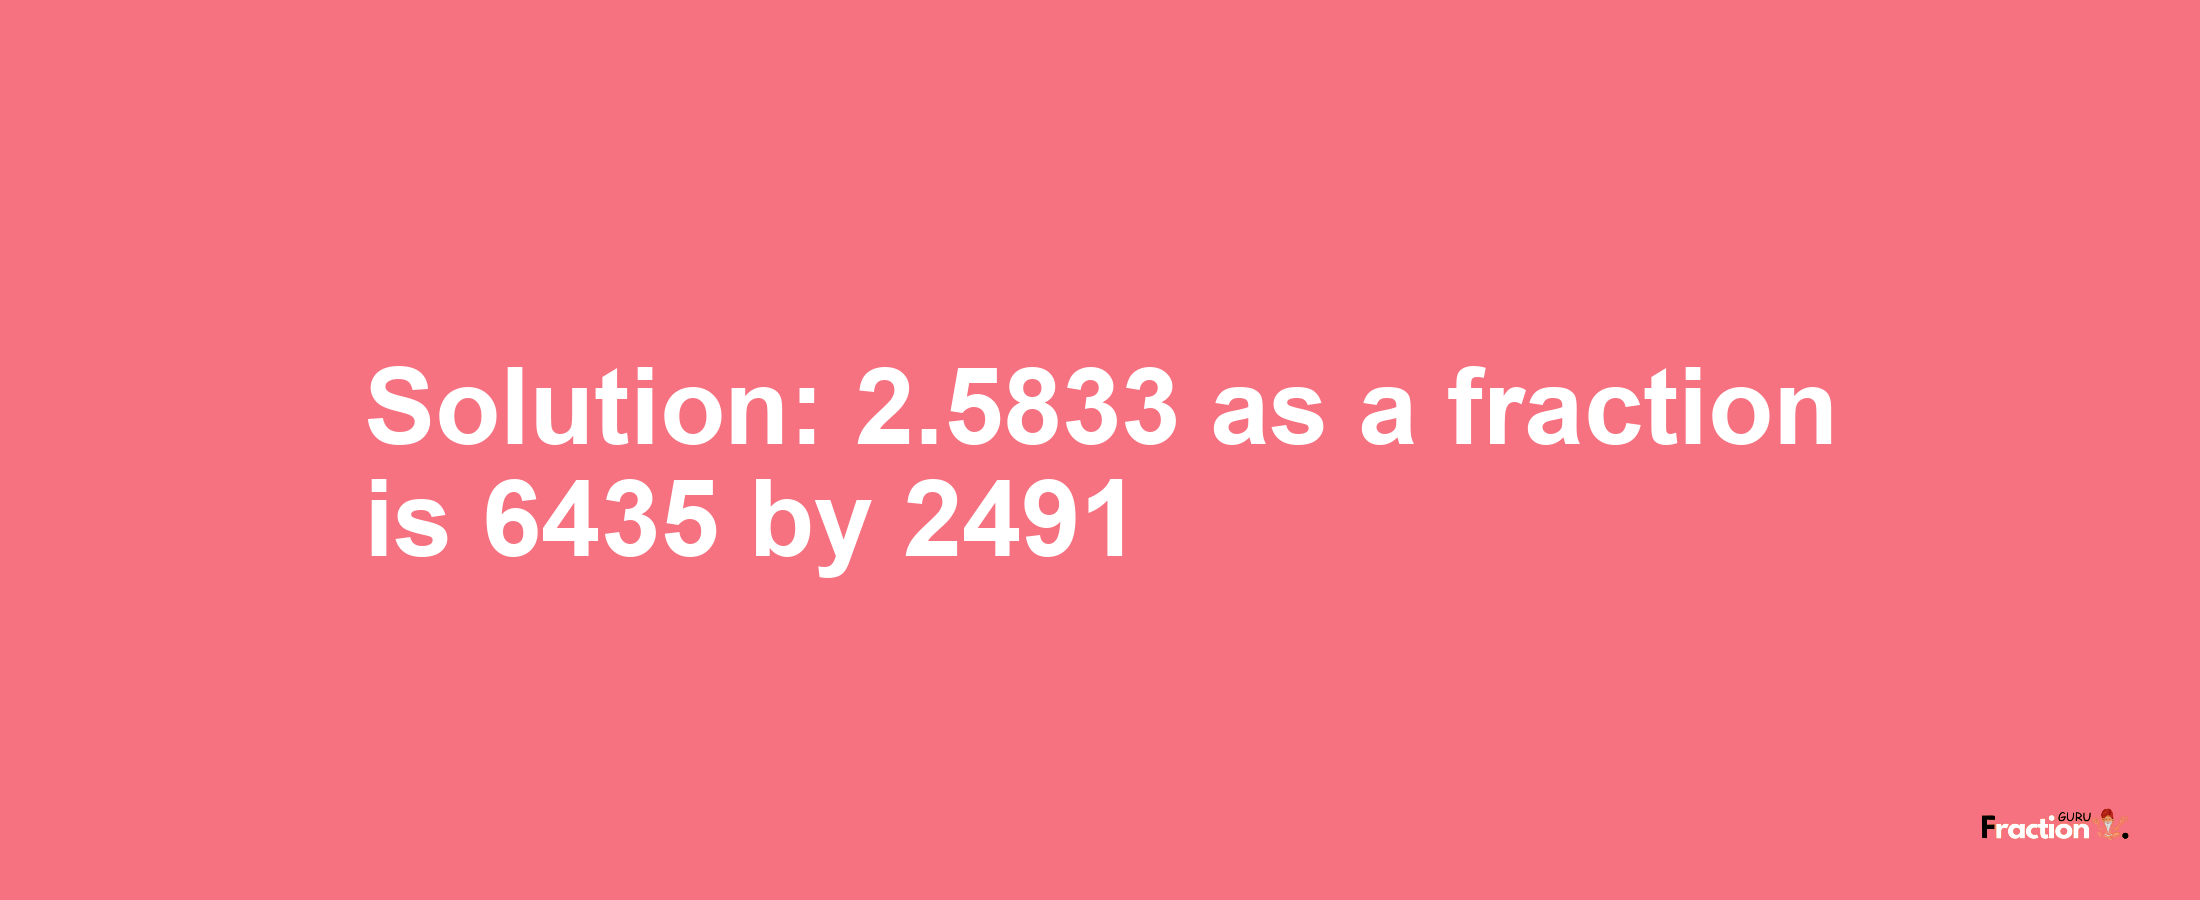 Solution:2.5833 as a fraction is 6435/2491